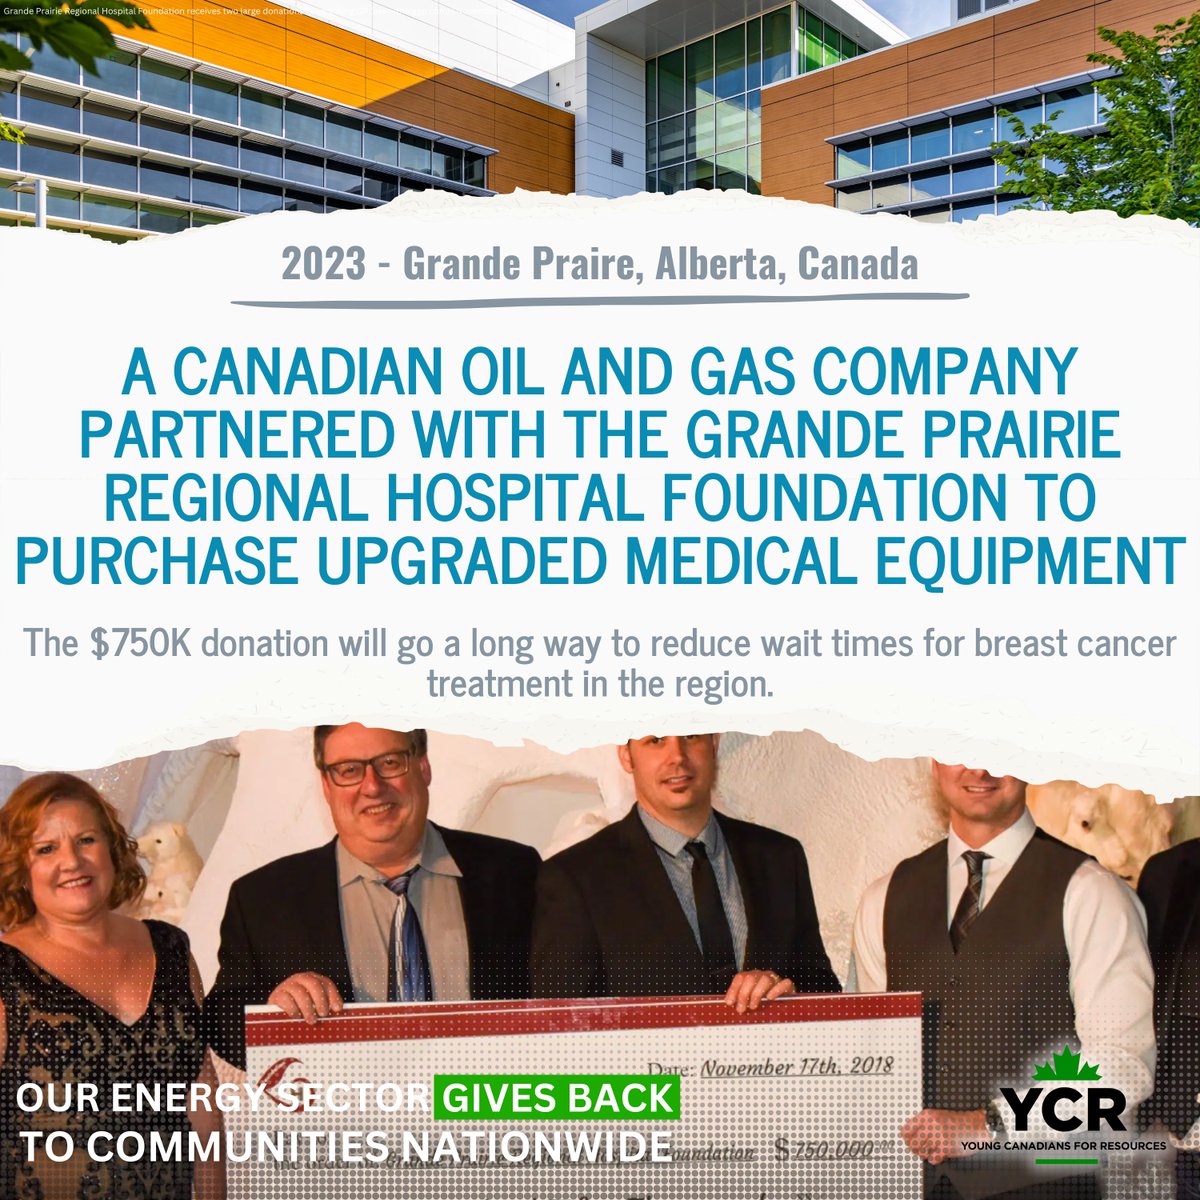 🍁 Our energy sector gives back to communities.

The Grande Prairie Regional Hospital Foundation received a generous $750K donation by an oil and gas company, which will go a long way to reduce wait times for breast cancer treatment. 🙏

#GrandePrairie #Alberta #oilandgas